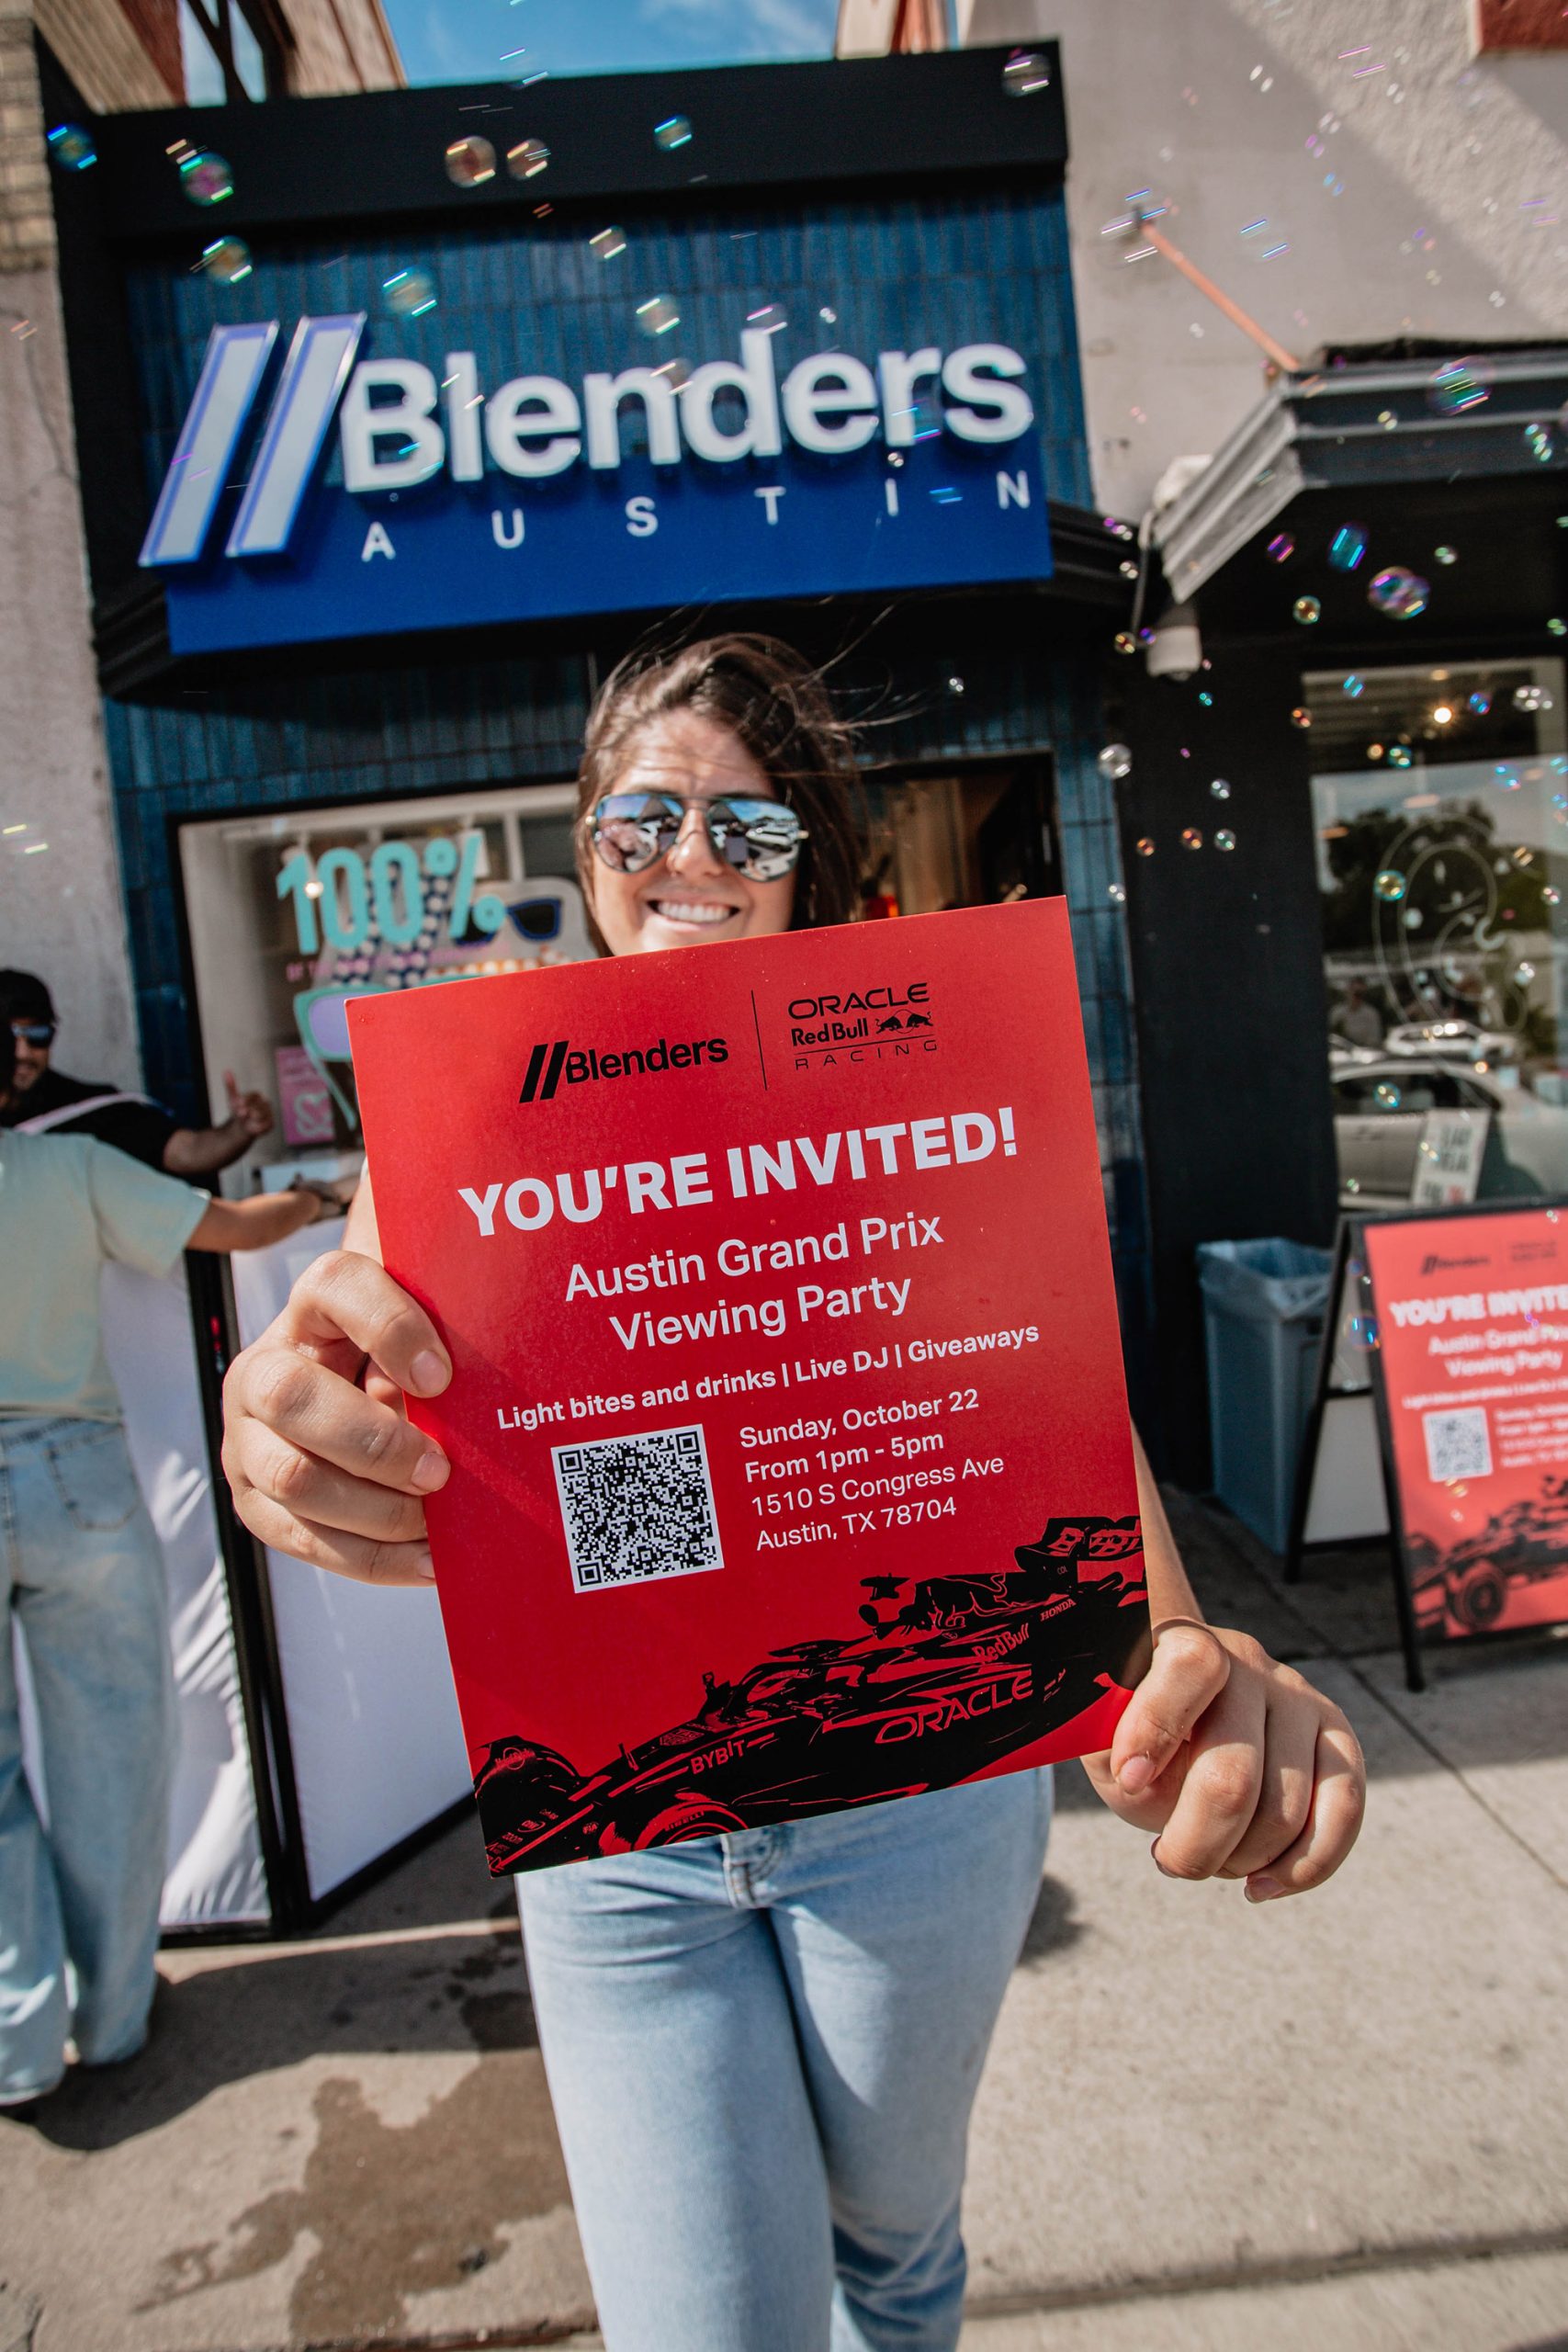 Event staffing and brand activation support for Blenders Eyewear